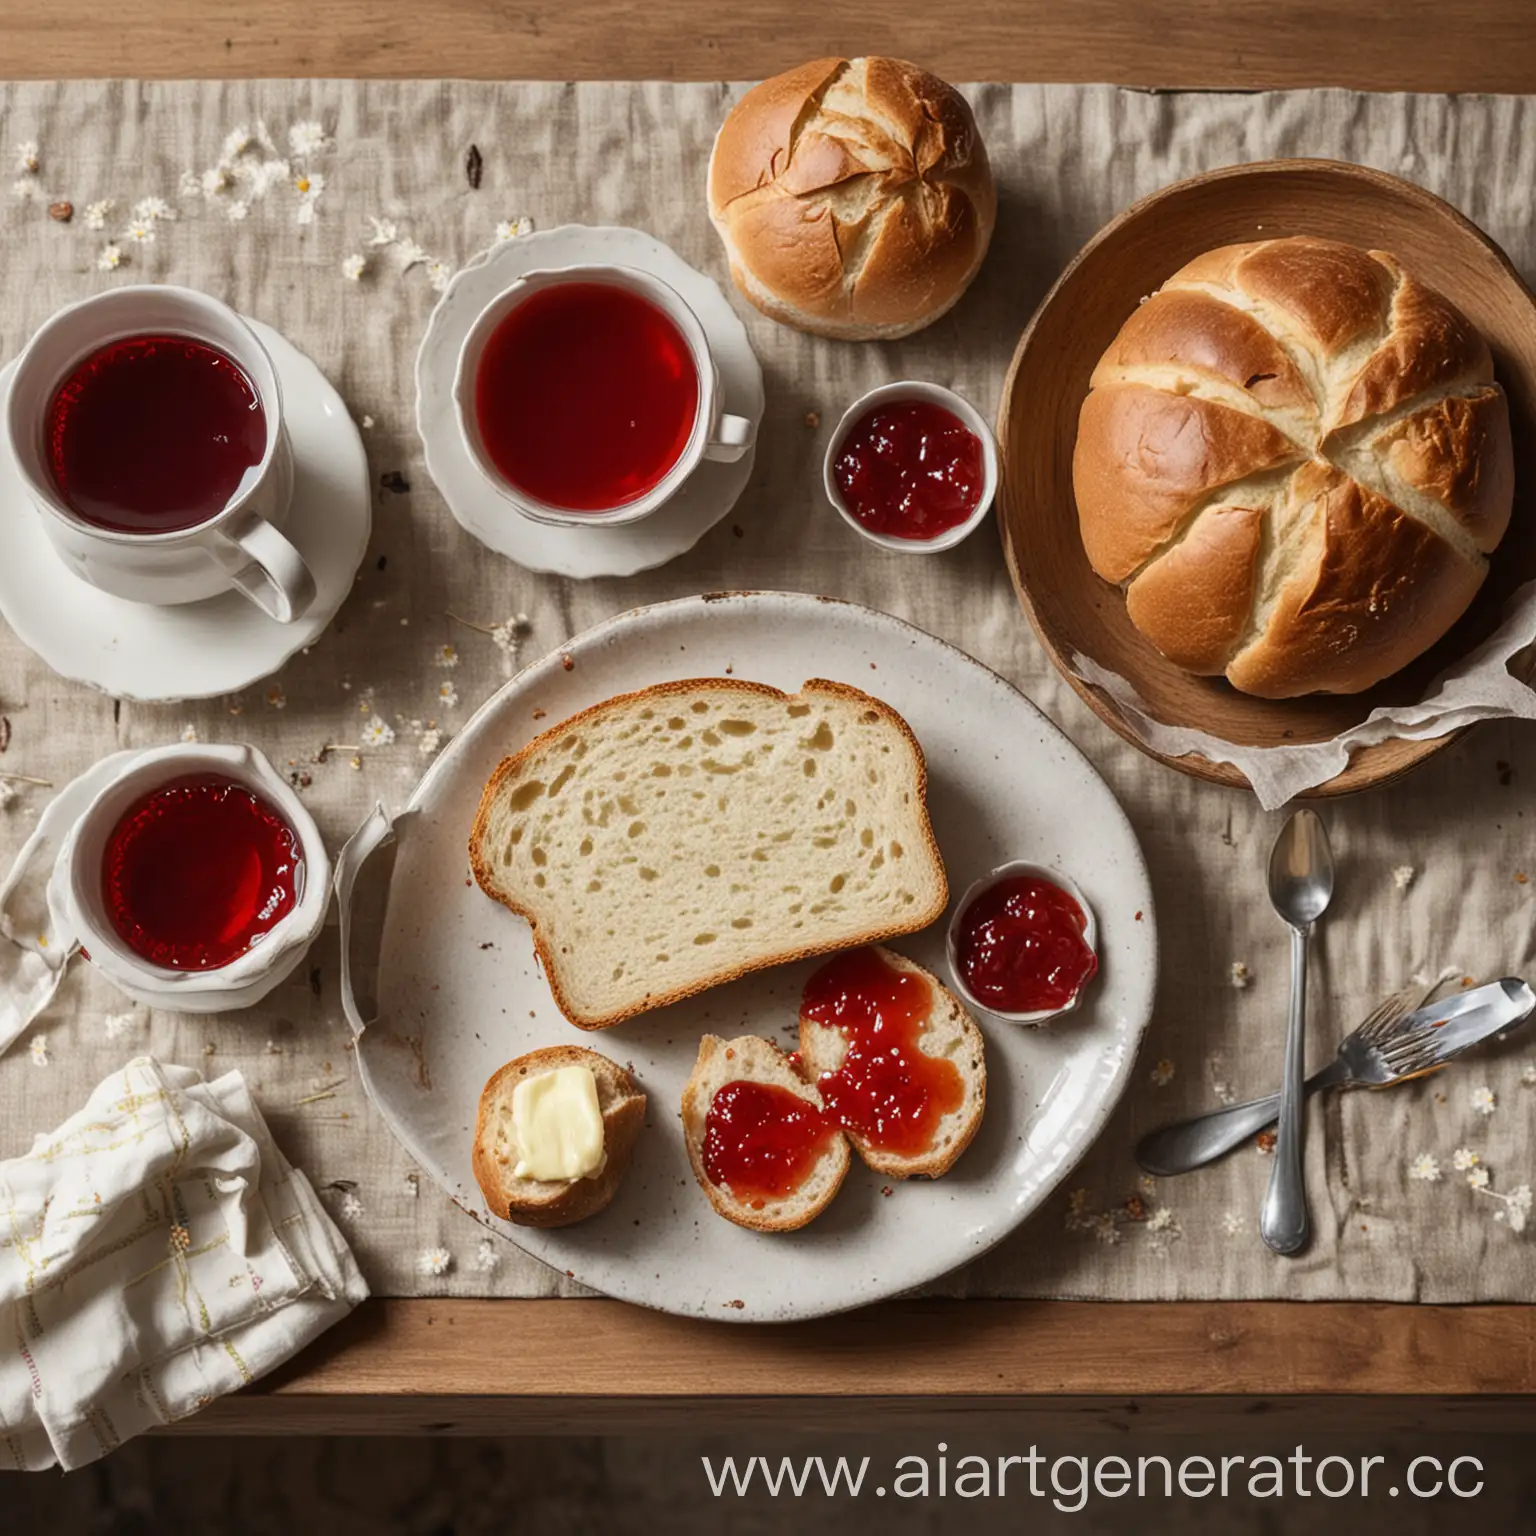 a table with a tea and bread with butter and strawberry jam. make it look tasty